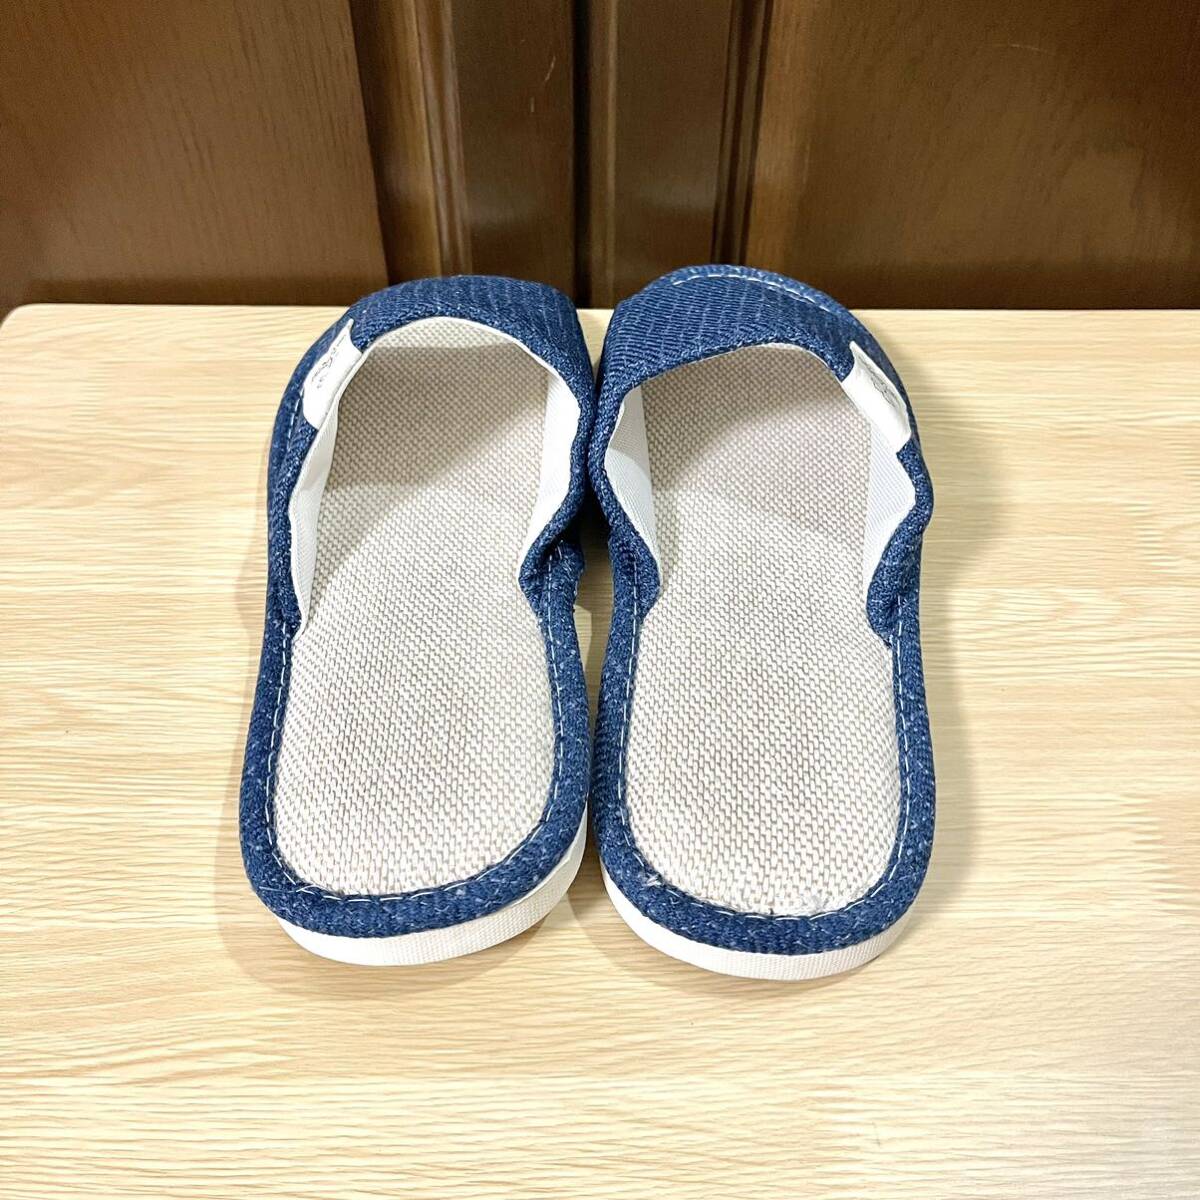  slippers room shoes linen flax all season ventilation cotton flax cloth feeling .. navy 25.5~26.0